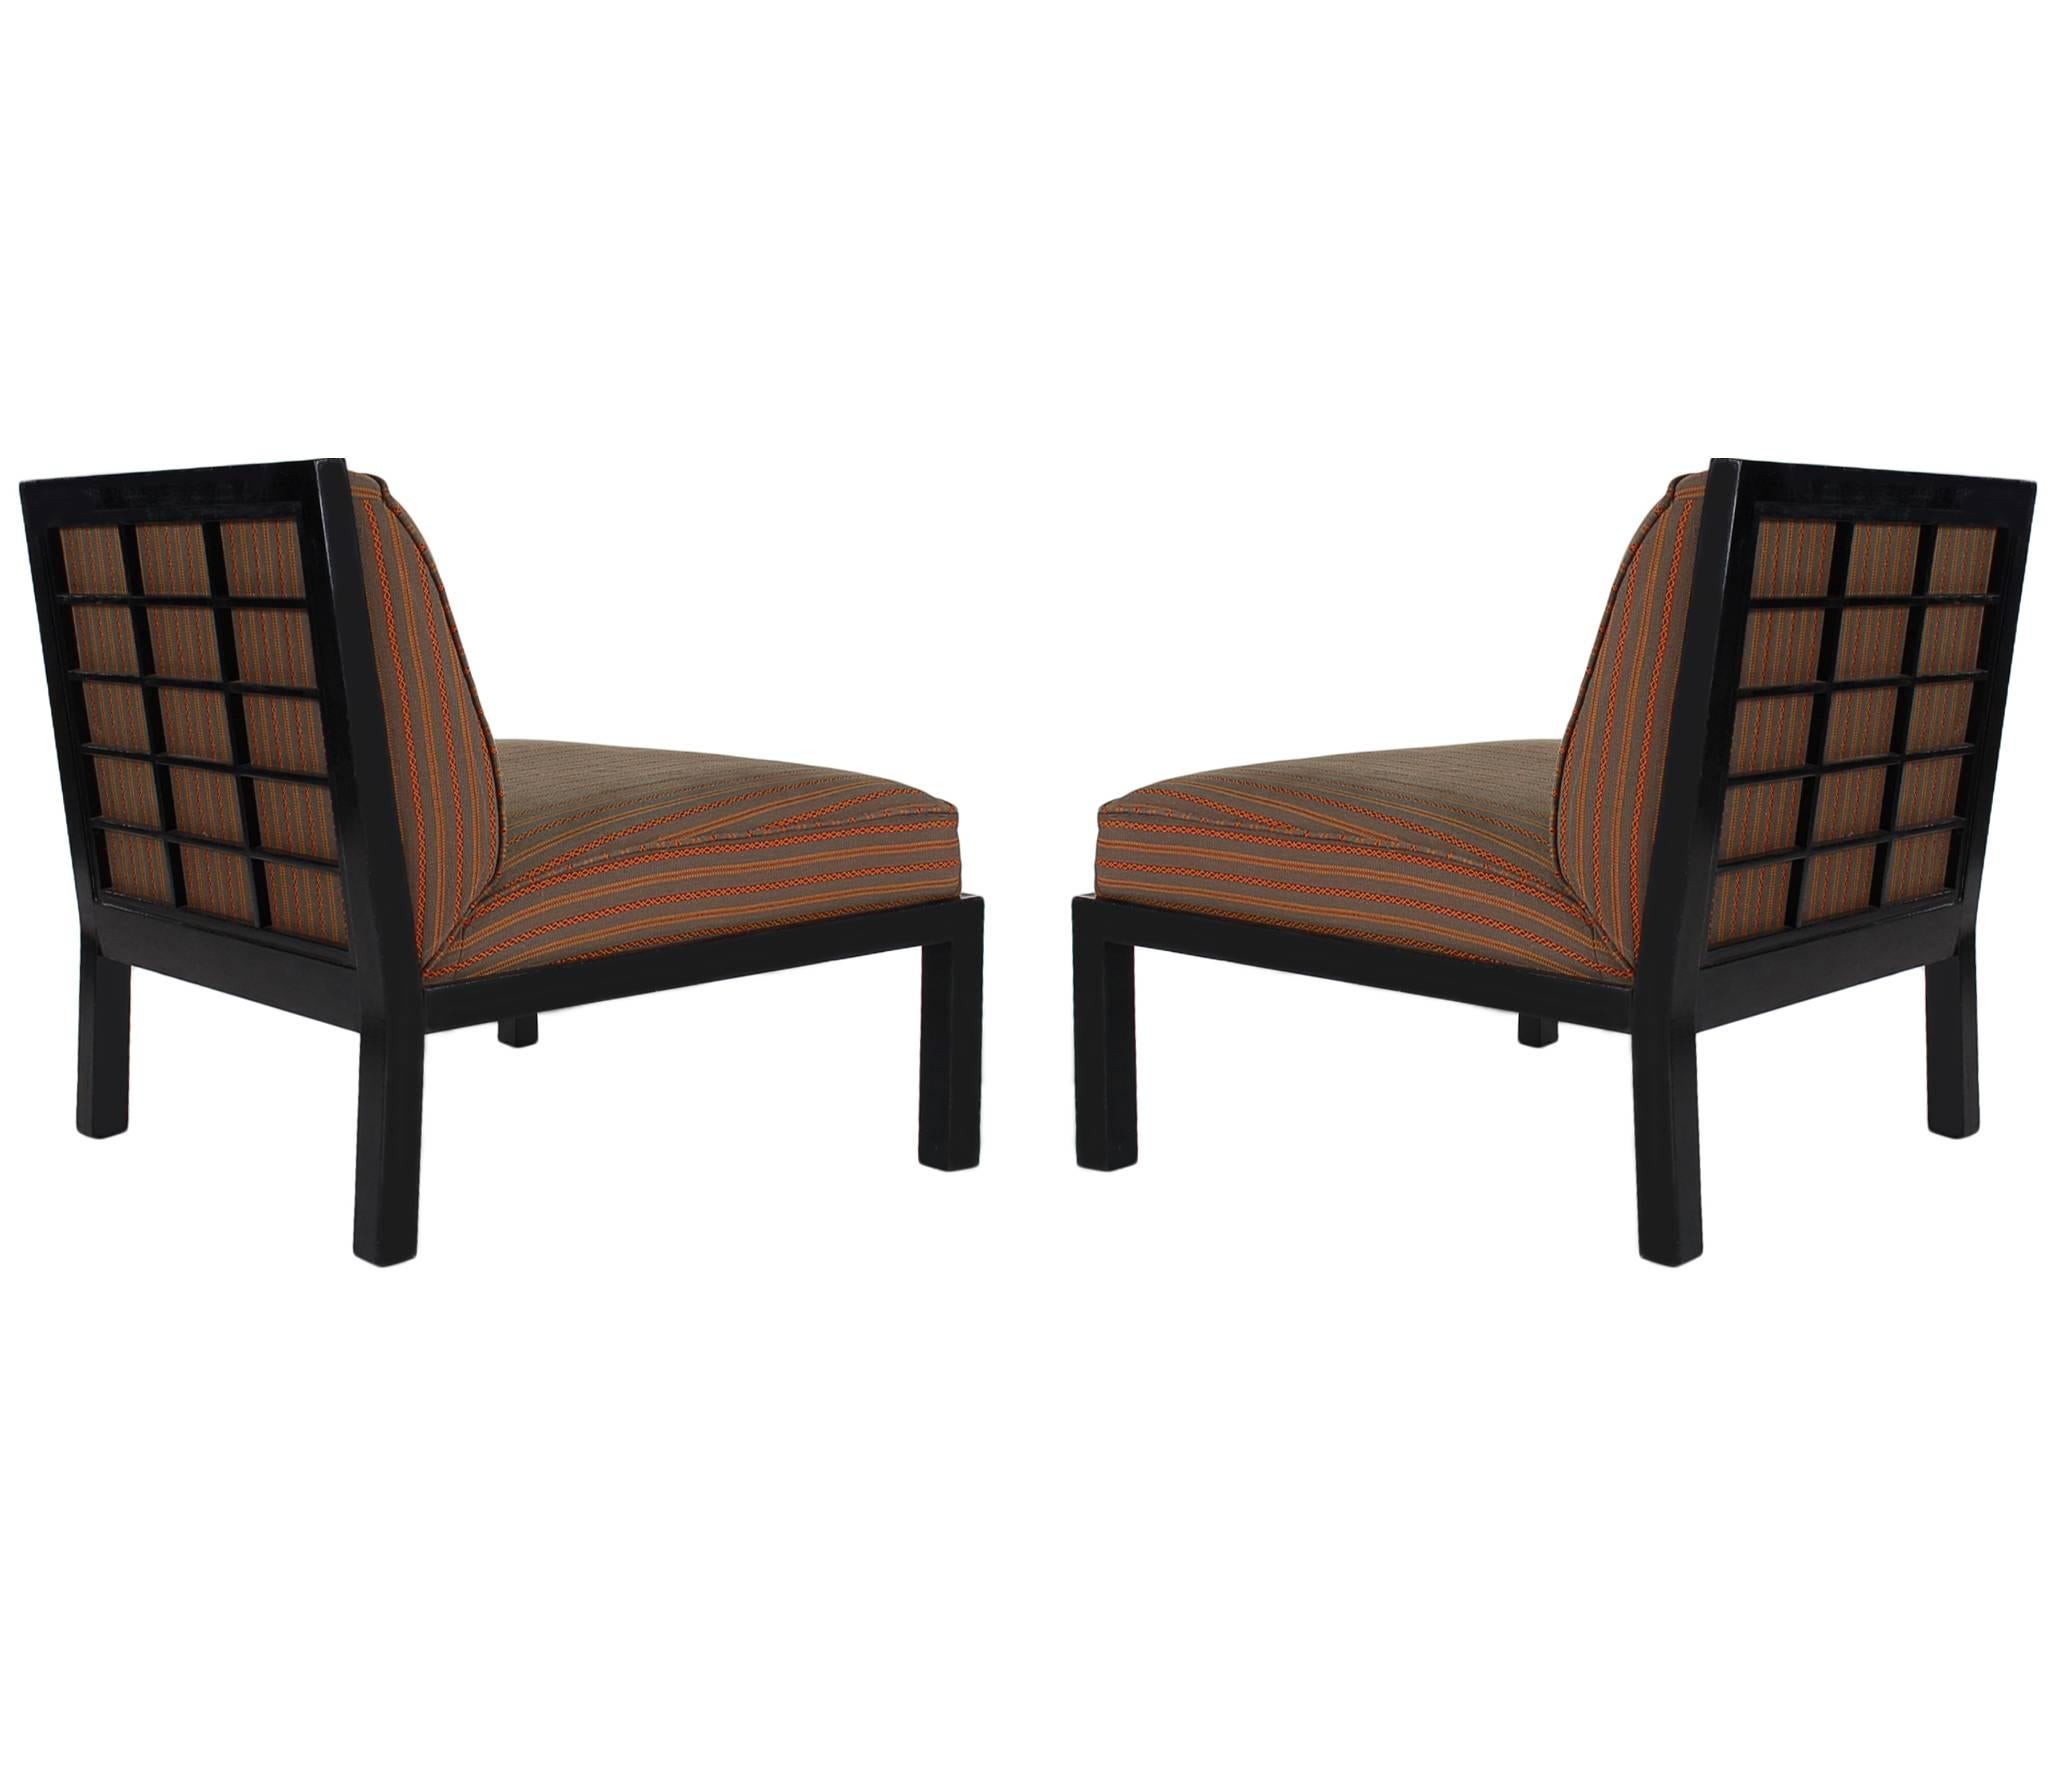 American Midcentury Asian Modern Black Slipper Lounge Chairs by Michael Taylor for Baker